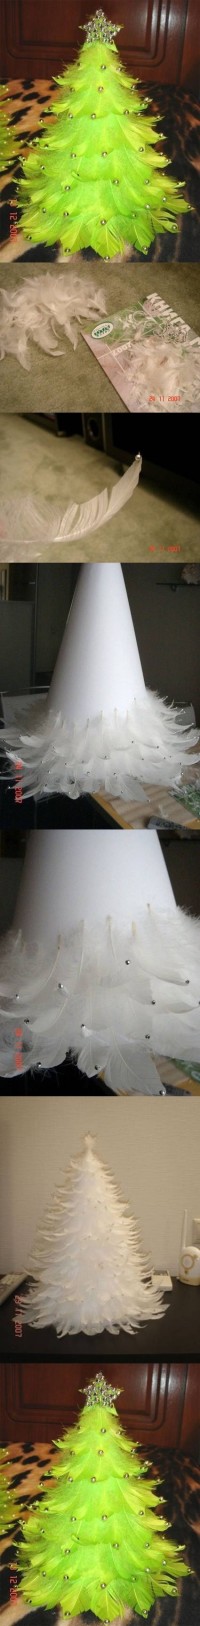 DIY Christmas Tree Out Of Feathers